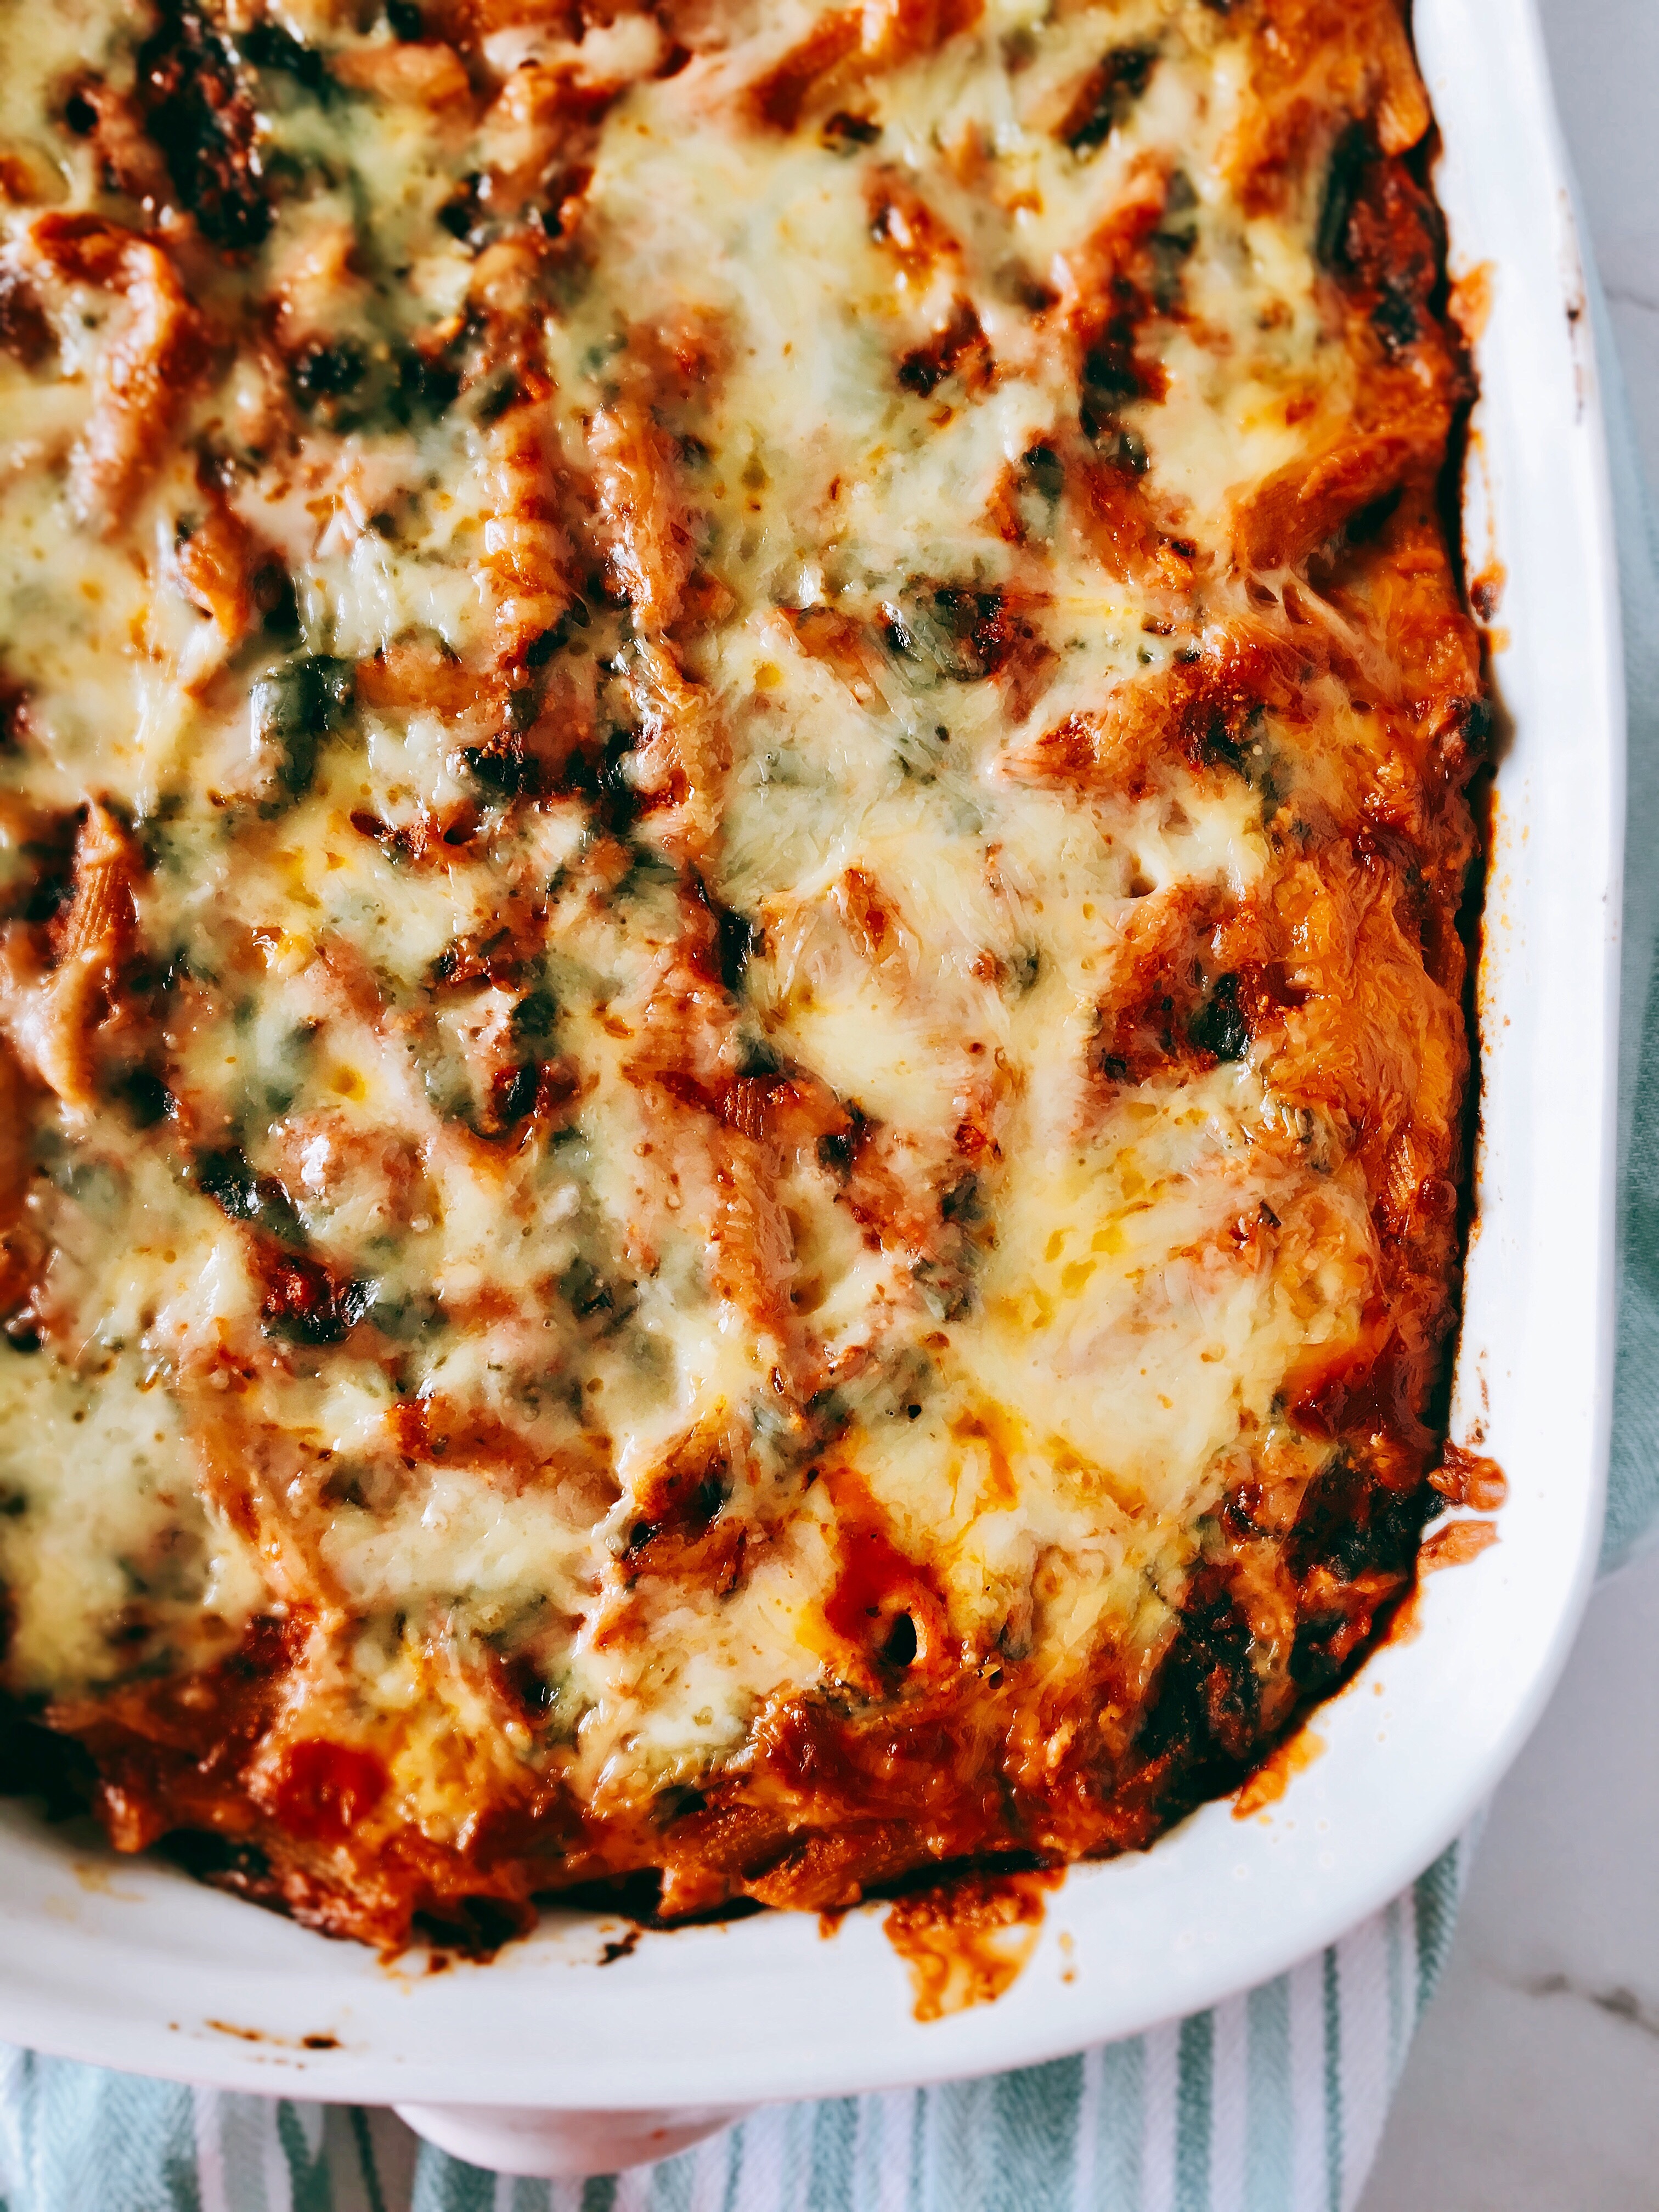 Baked Penne with Italian Sausage and Spinach